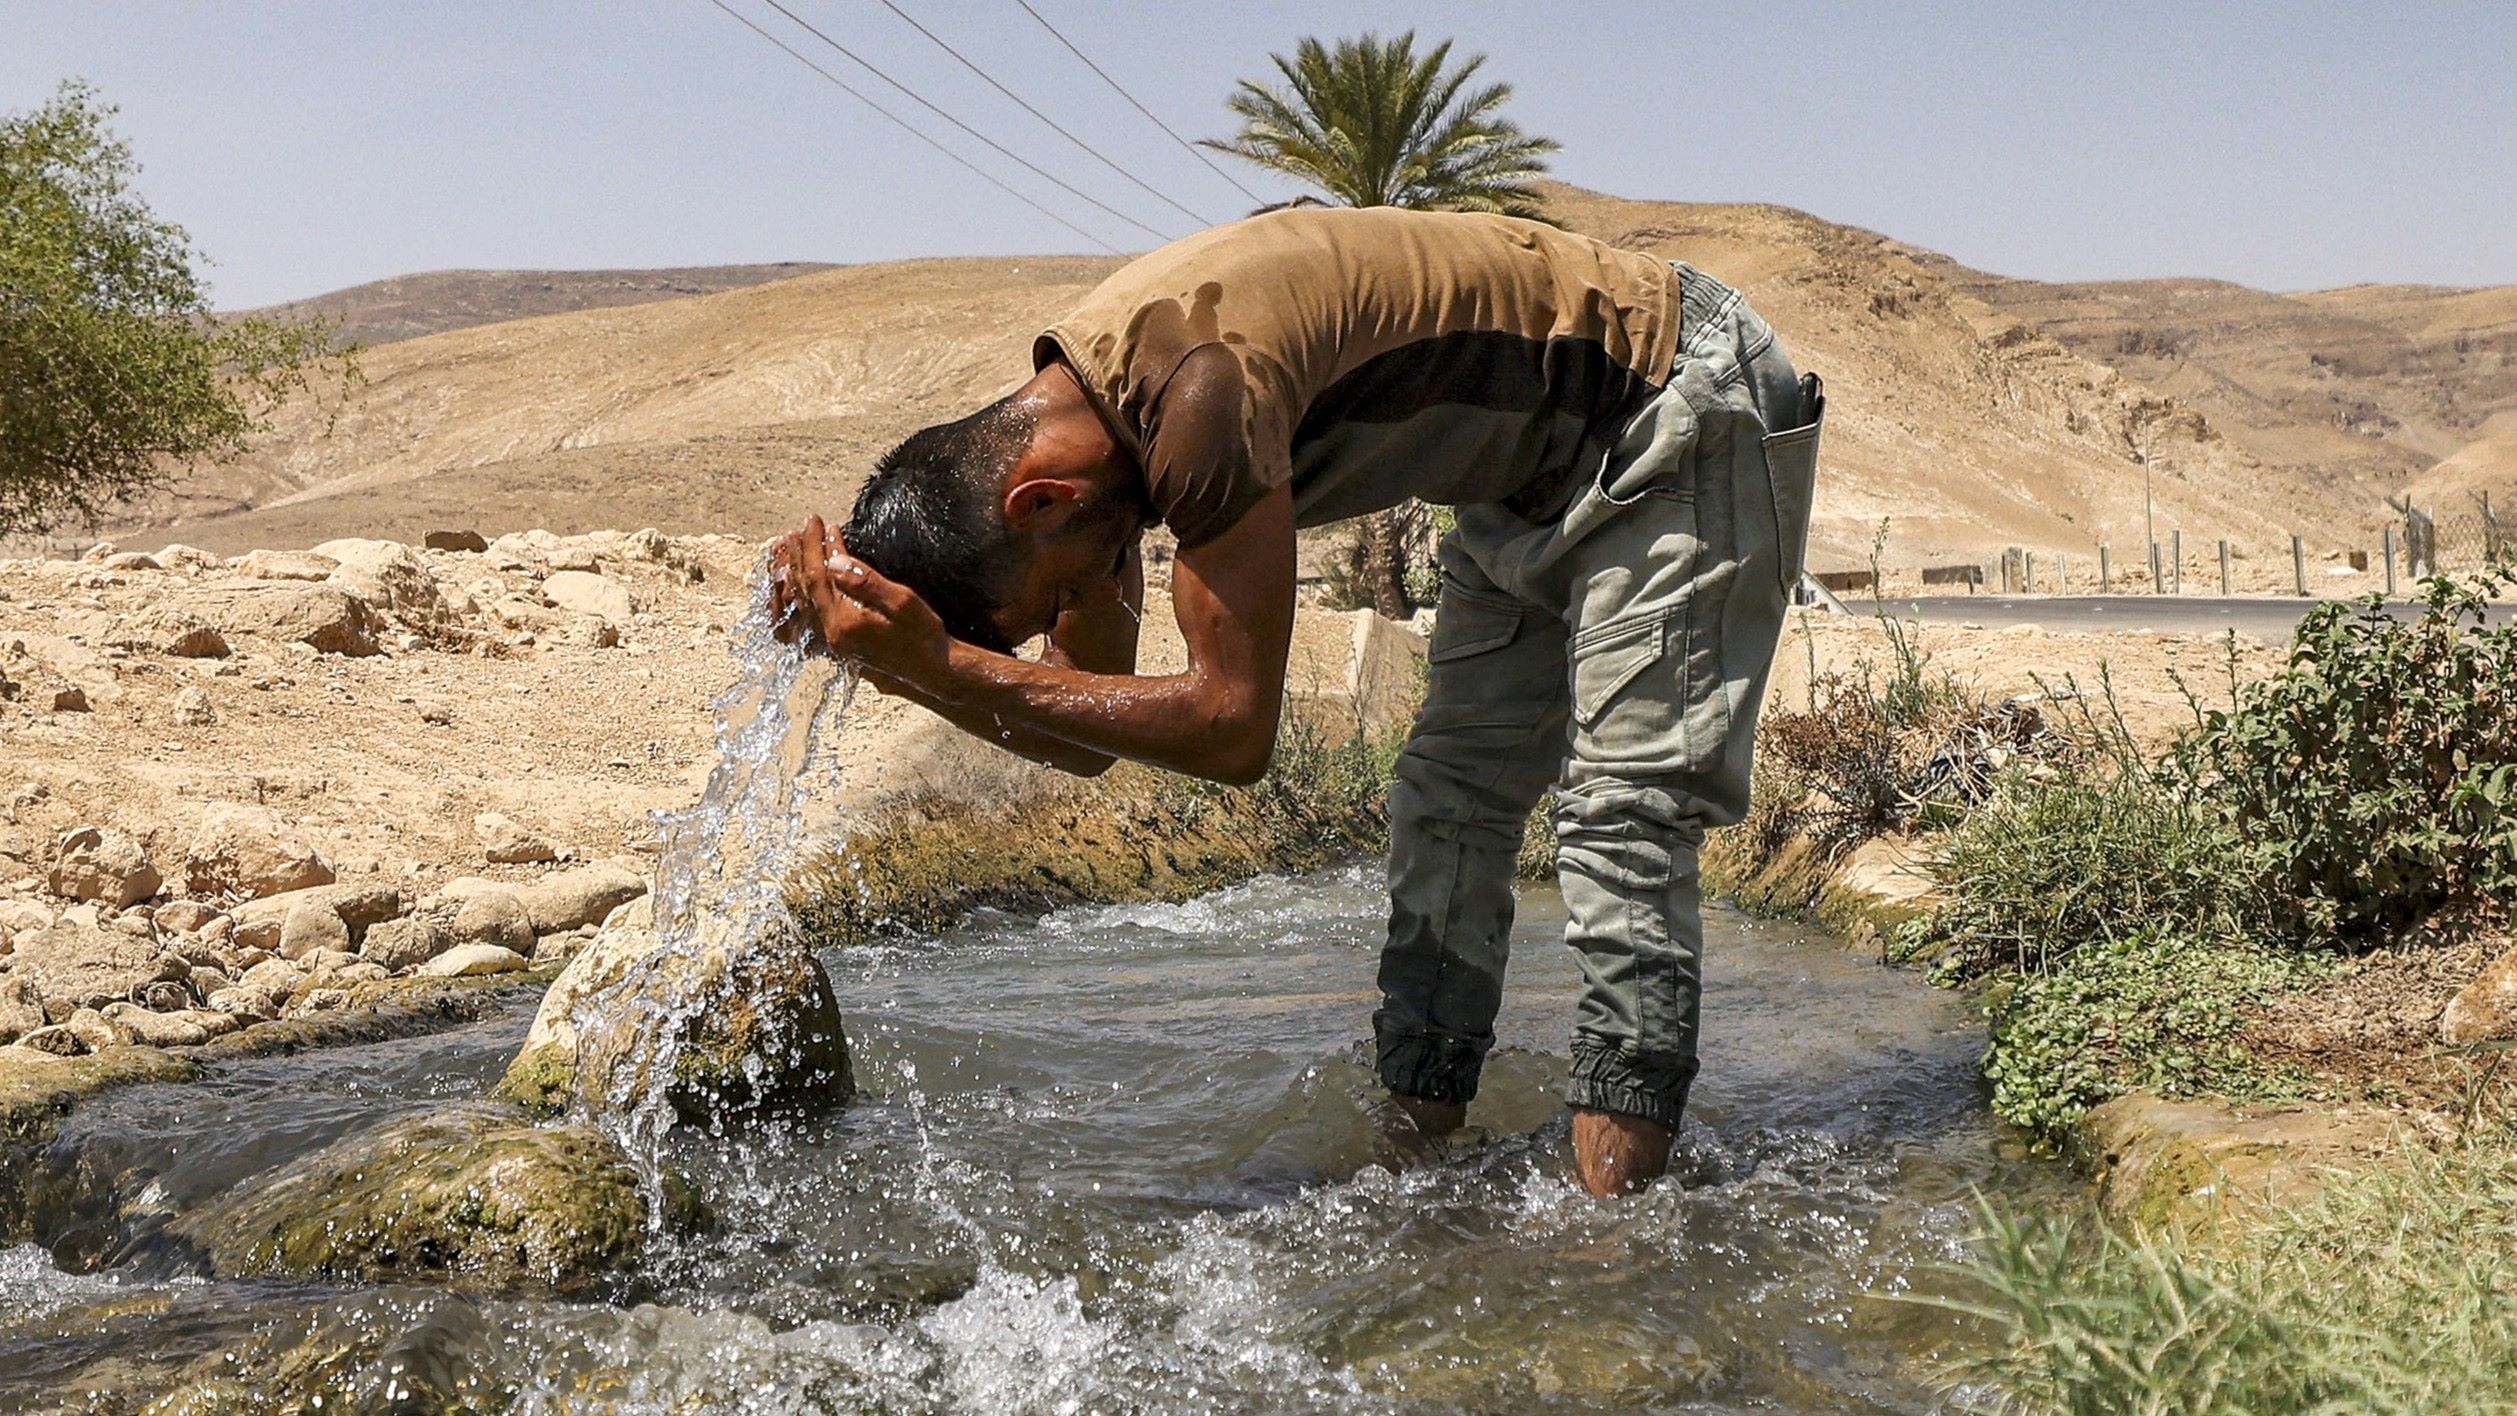 A man cools off at a stream north of the Palestinian city of Jericho (AFP/Hazem Bader)